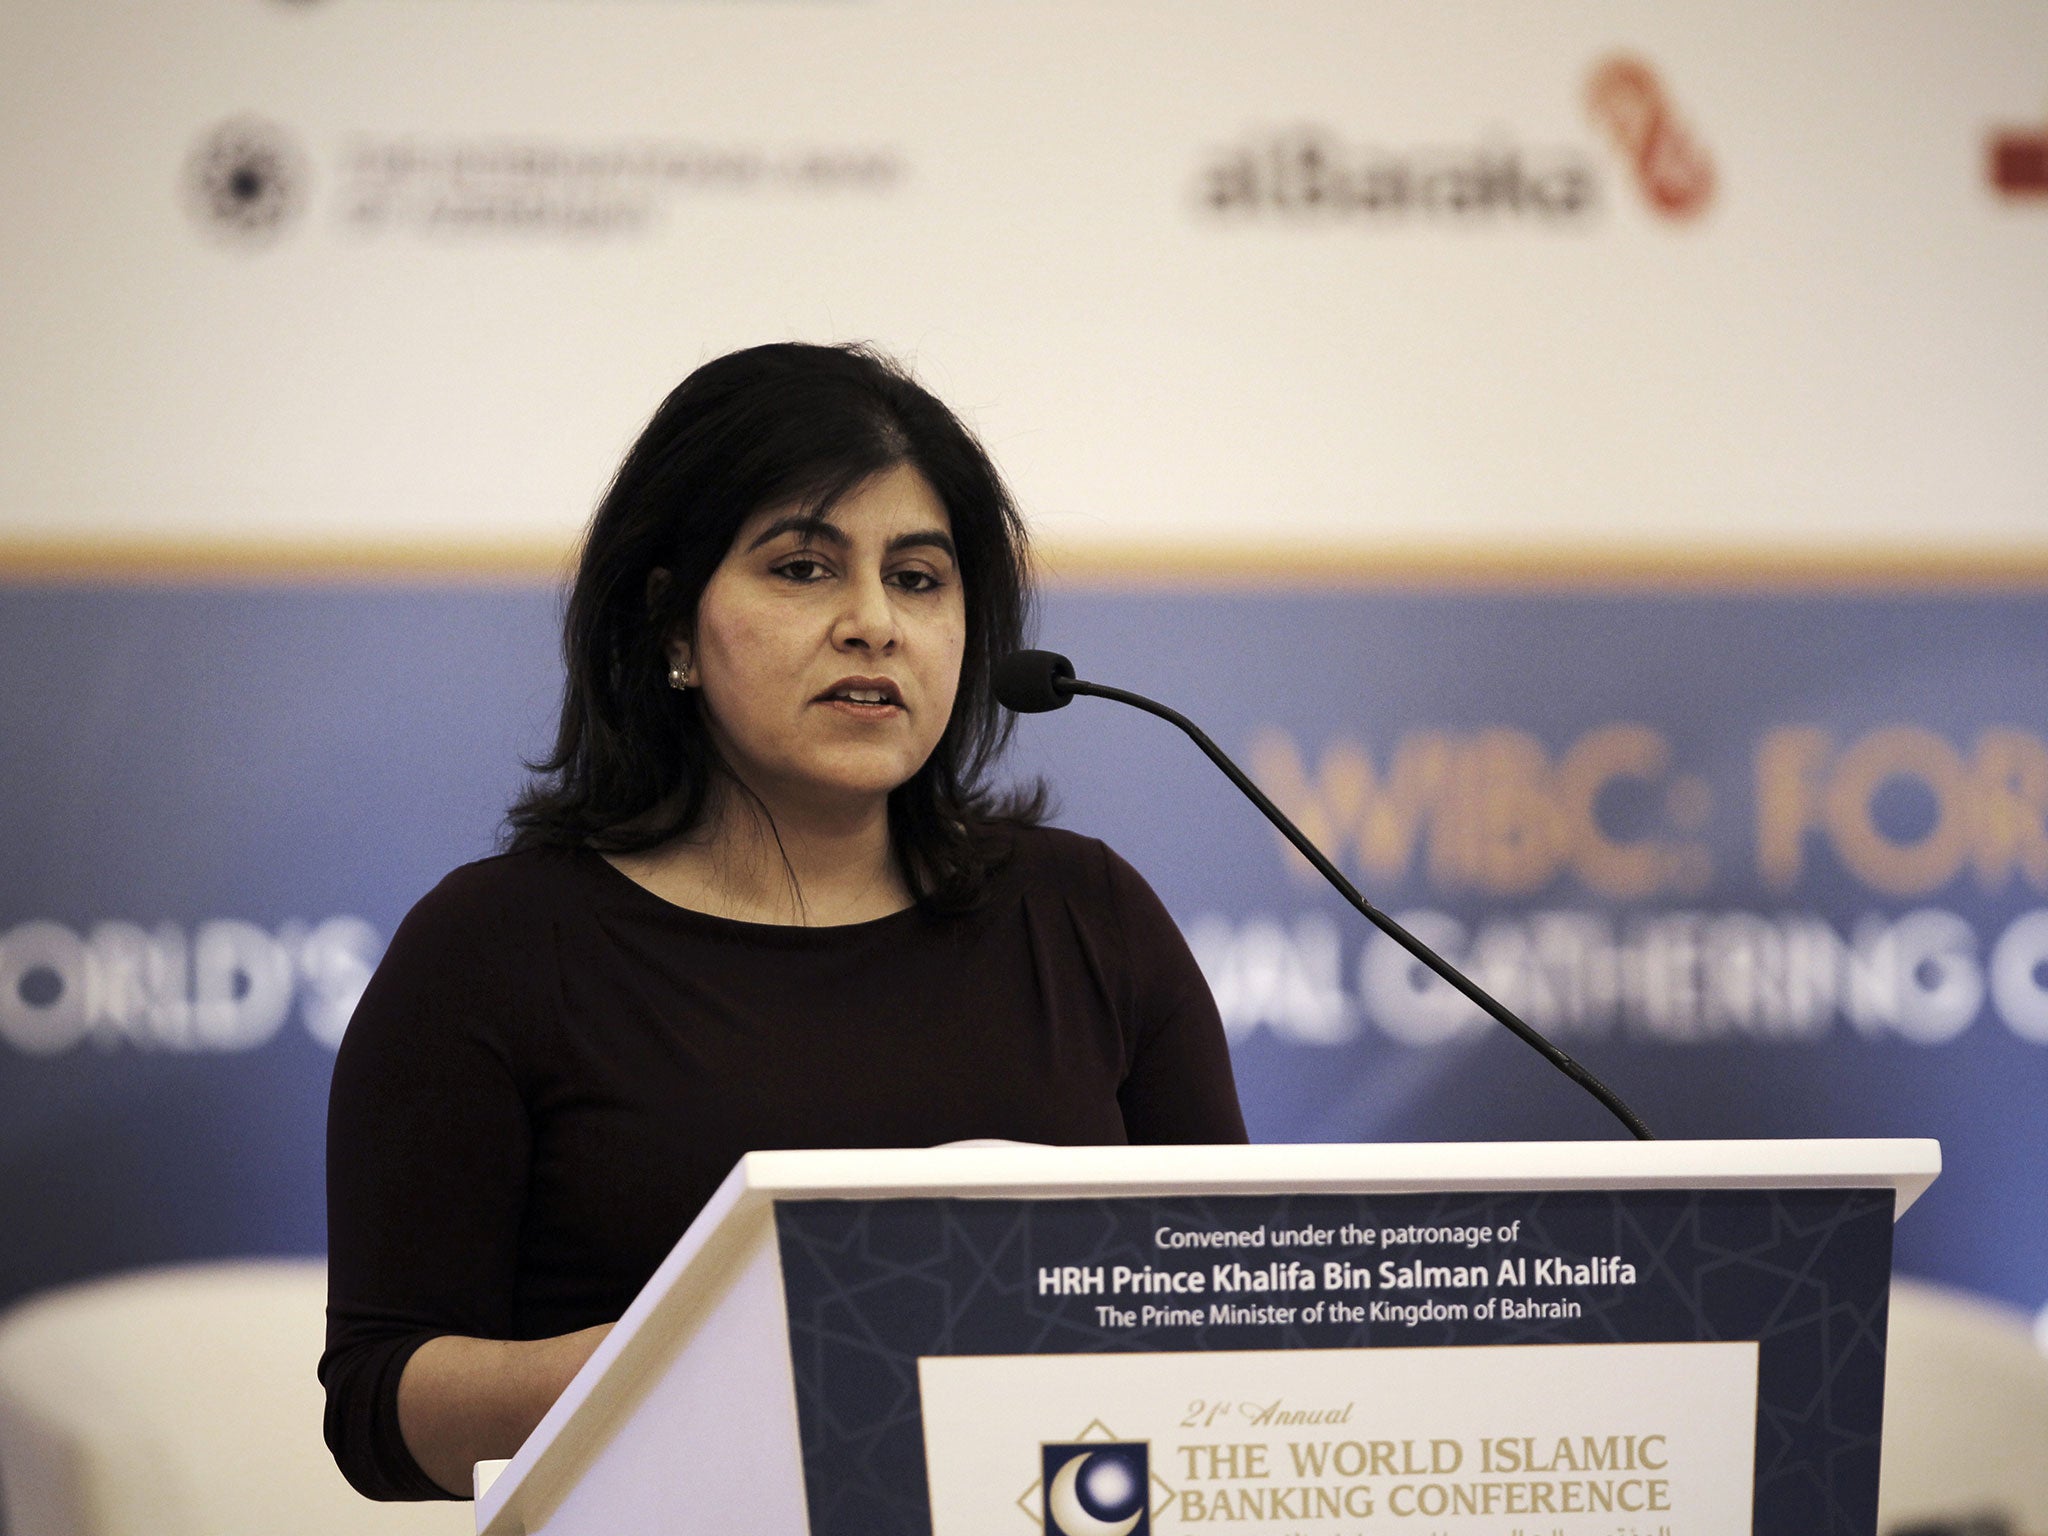 Baroness Warsi was Britain’s most senior Muslim minister until she resigned from her post